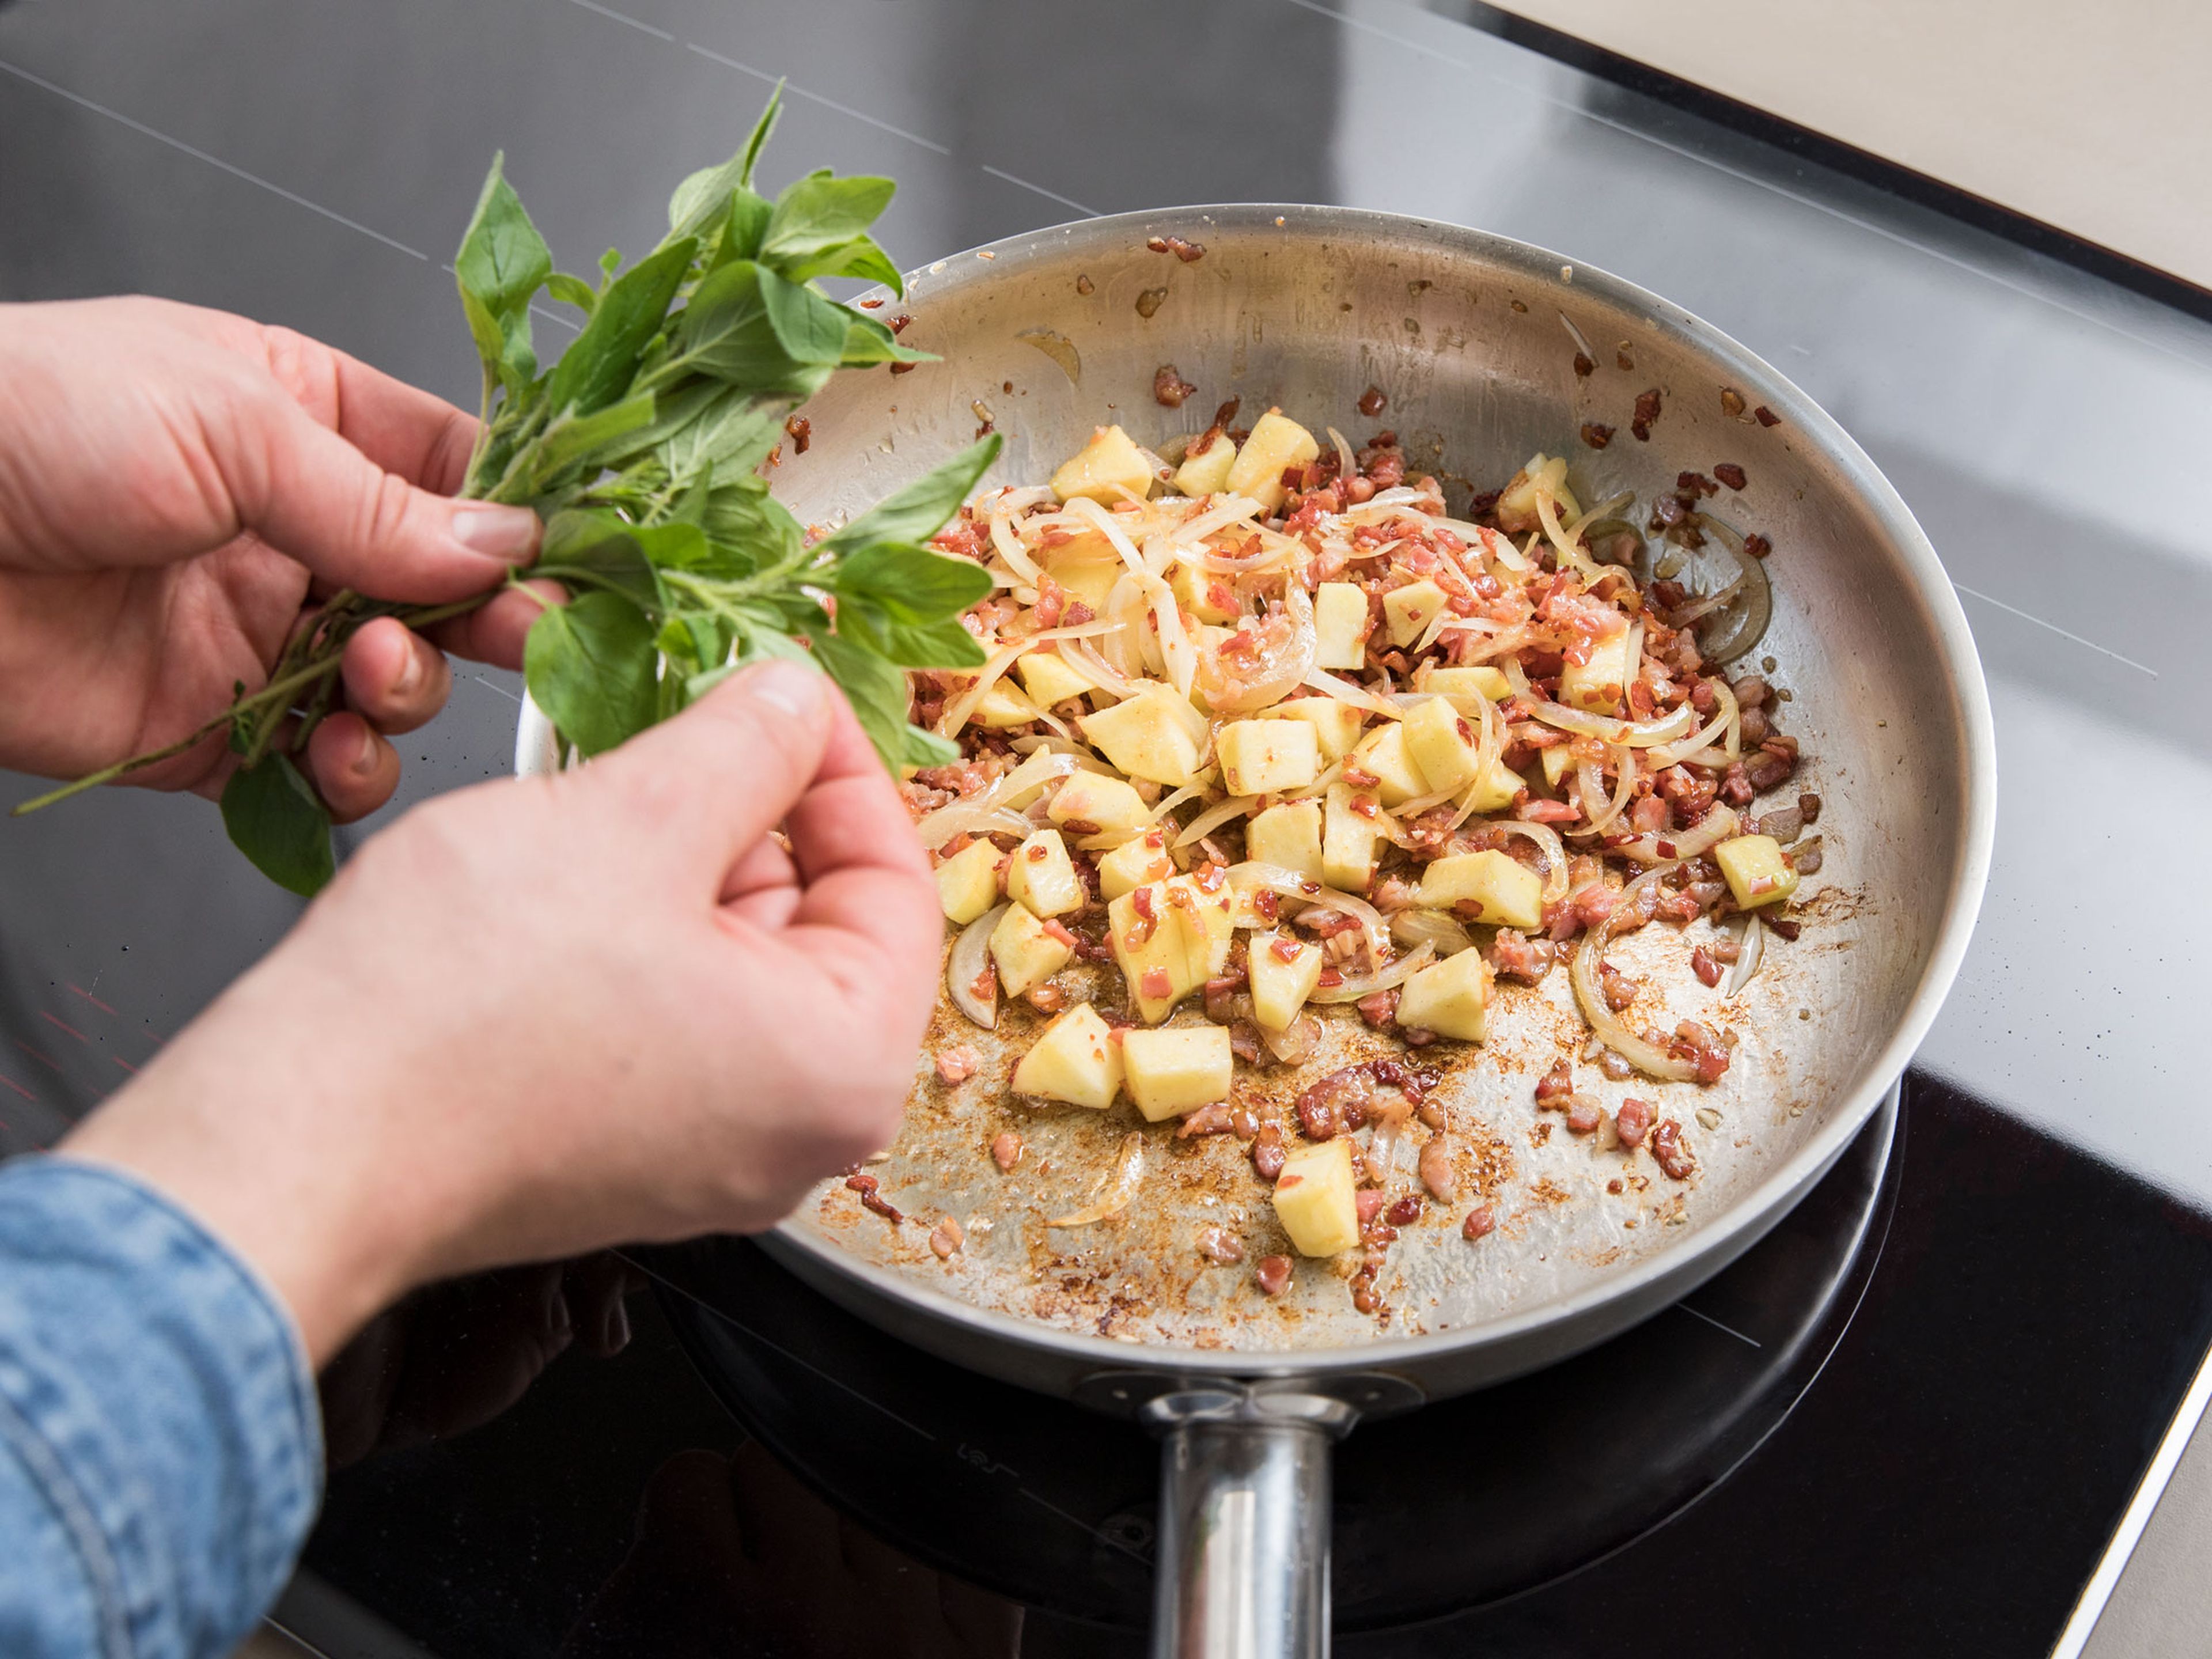 Heat oil in a frying pan. Add bacon and let render. Add garlic, onion, and apple dices and sauté for approx. 2 – 3 min. Add honey, marjoram, rutabaga, and mustard. Toss to combine.